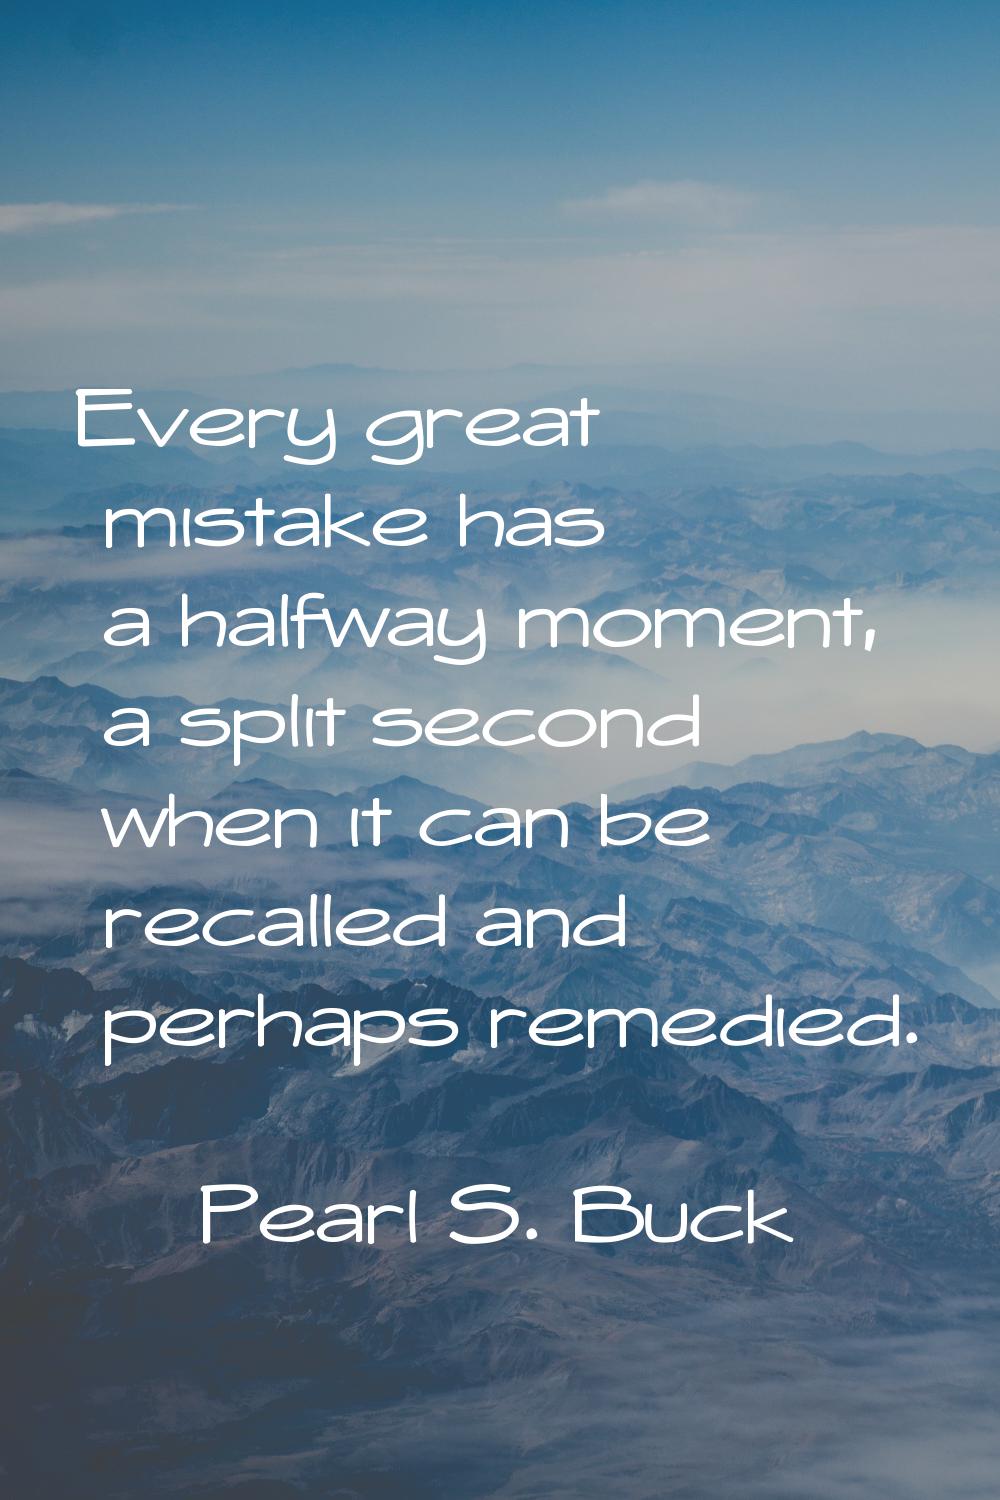 Every great mistake has a halfway moment, a split second when it can be recalled and perhaps remedi